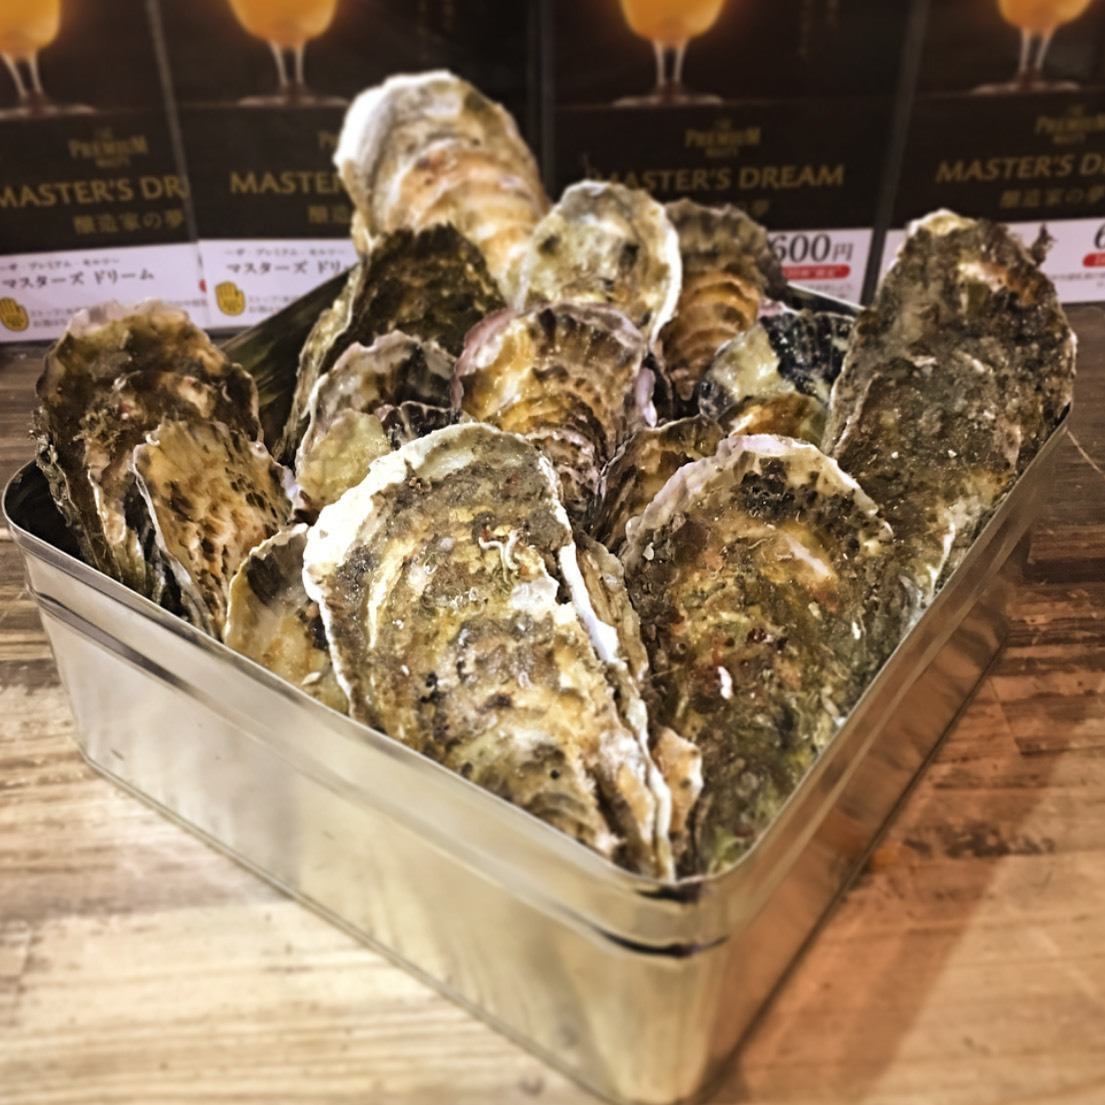 Enjoy a blissful moment of eating oysters for two hours!